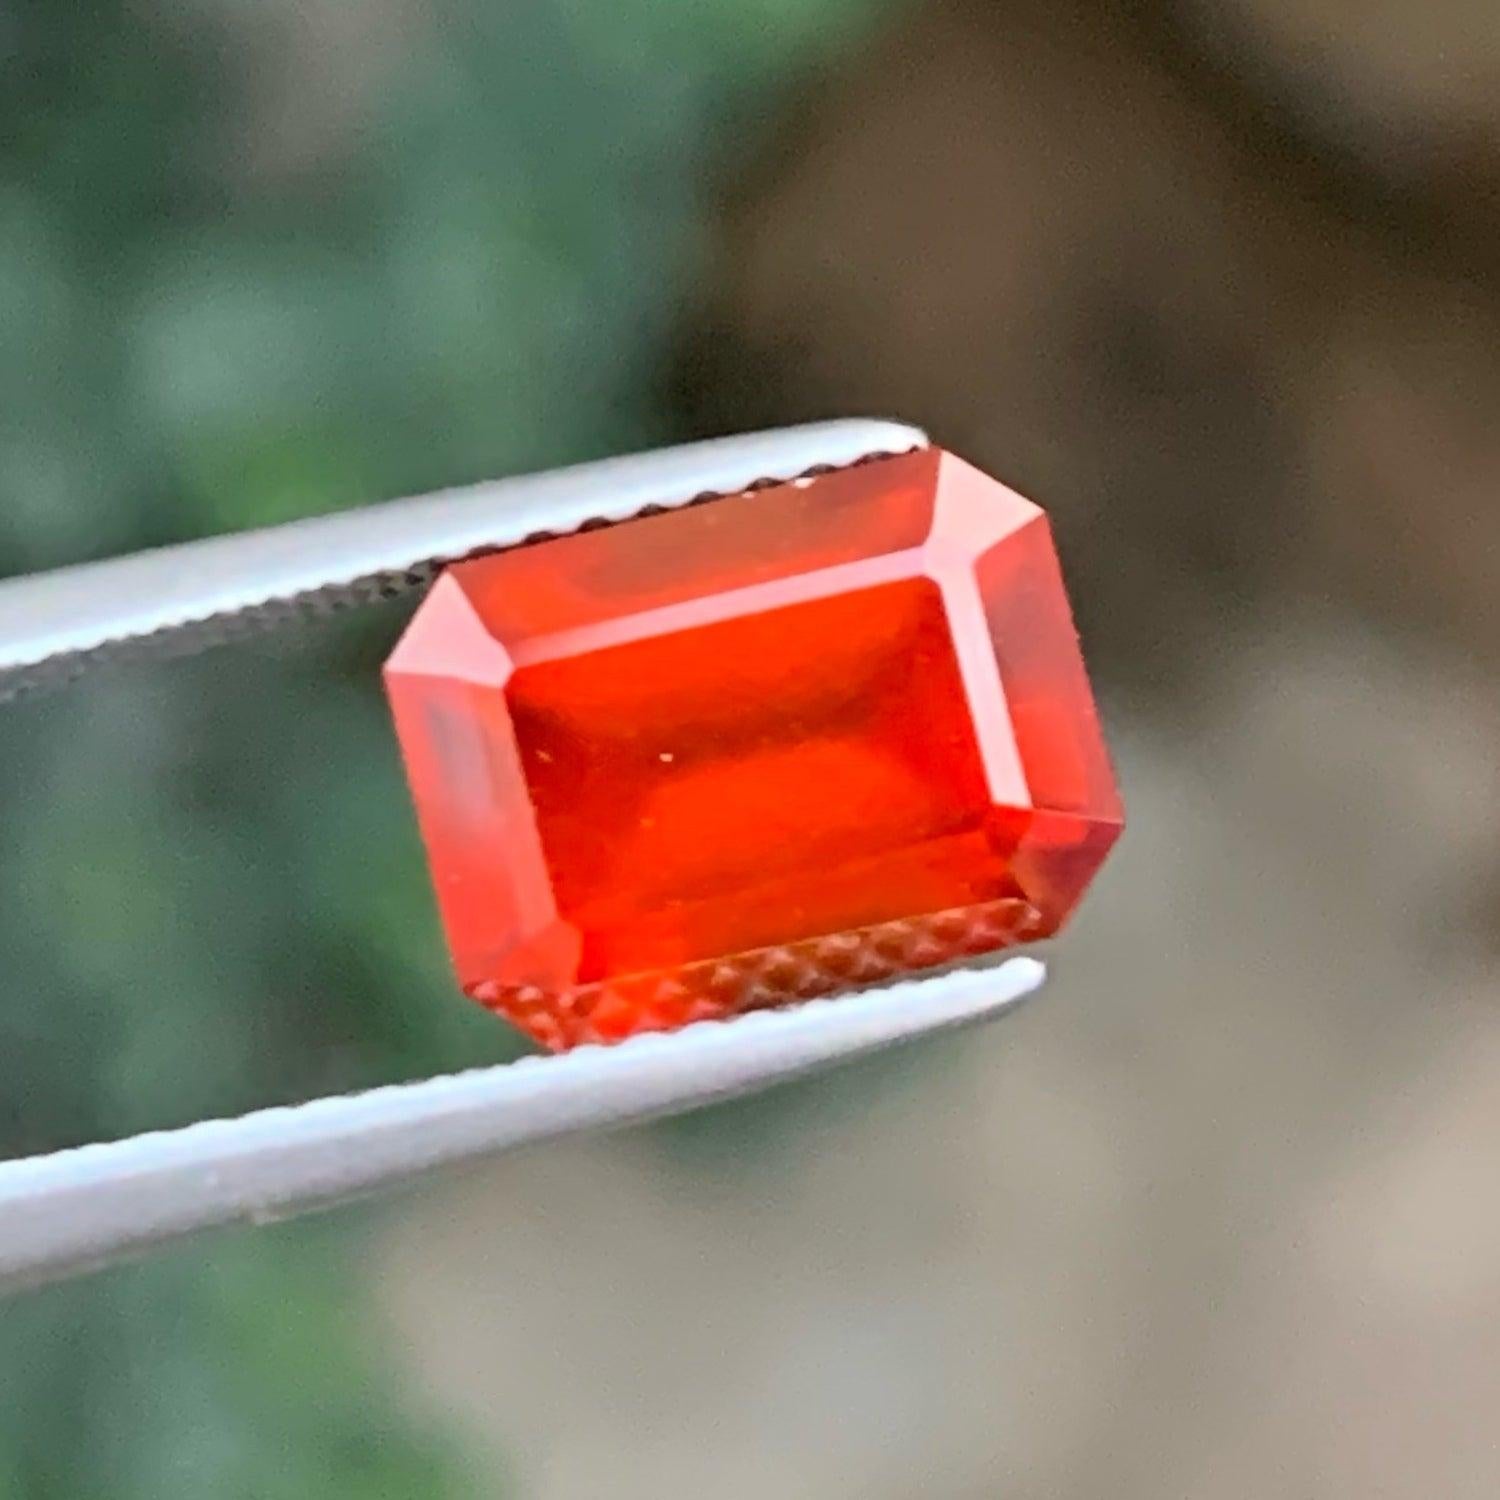 Stunning Cut Natural Hessonite Garnet, Available For Sale At Wholesale Price Natural High Quality 4.50 Carats Natural Untreated Garnet From Madagascar.

Product Information:
GEMSTONE NAME: Stunning Cut Natural Hessonite Garnet
WEIGHT:	4.50